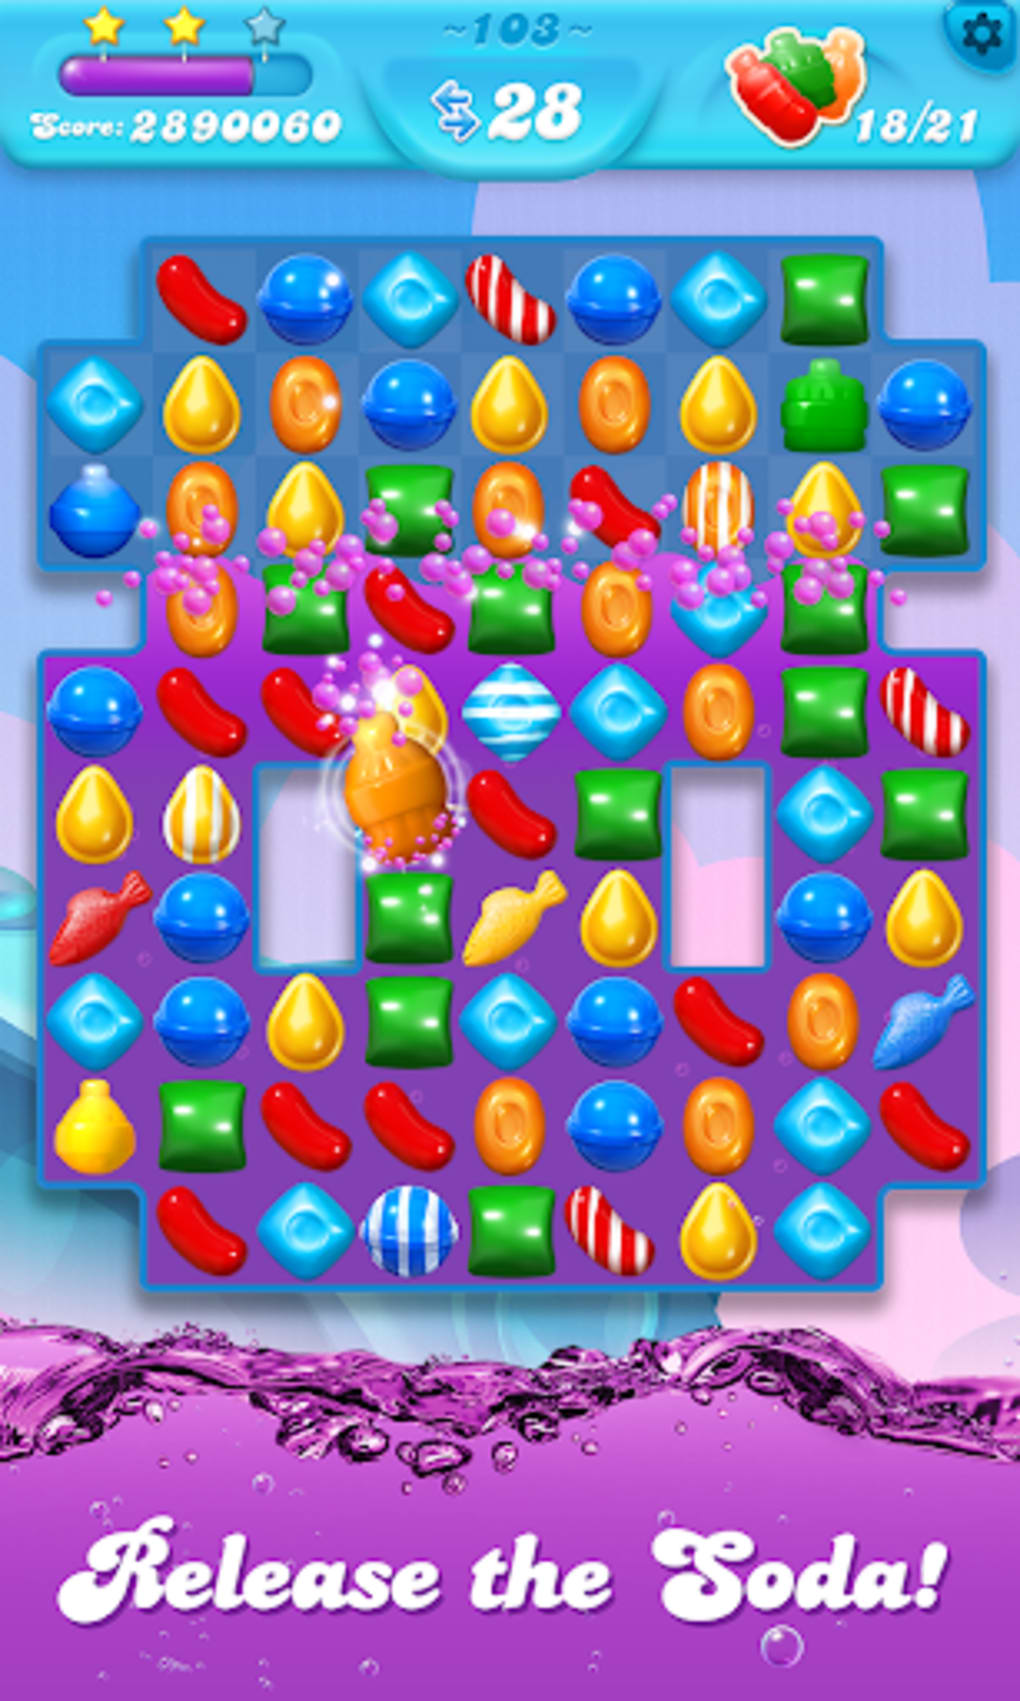 Candy Crush Soda Saga for Android - Download